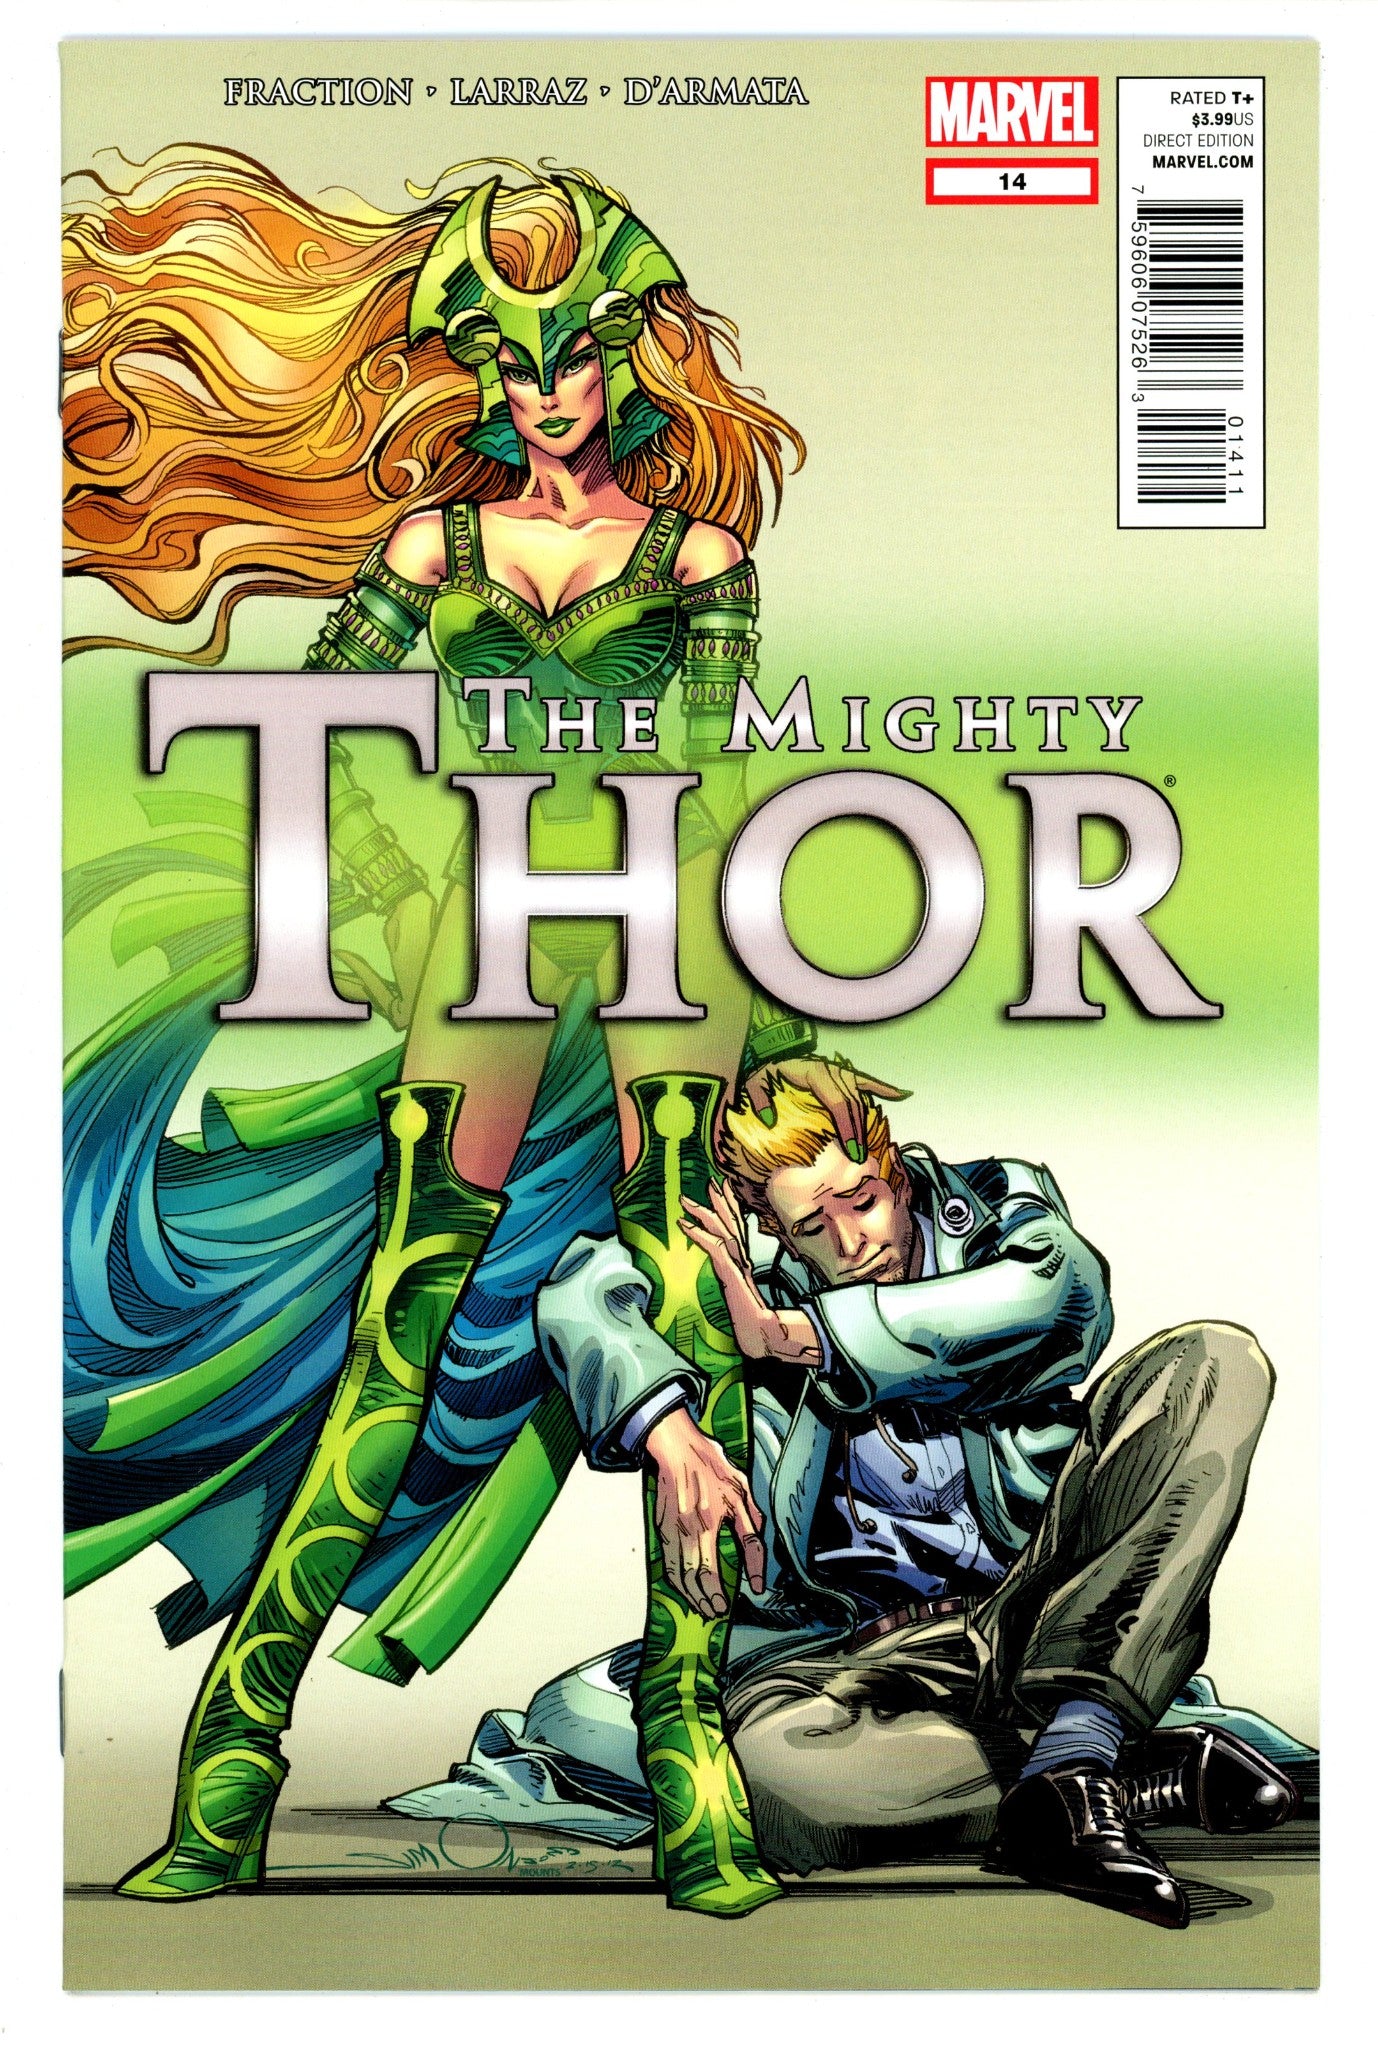 The Mighty Thor Vol 1 14 High Grade (2012) 